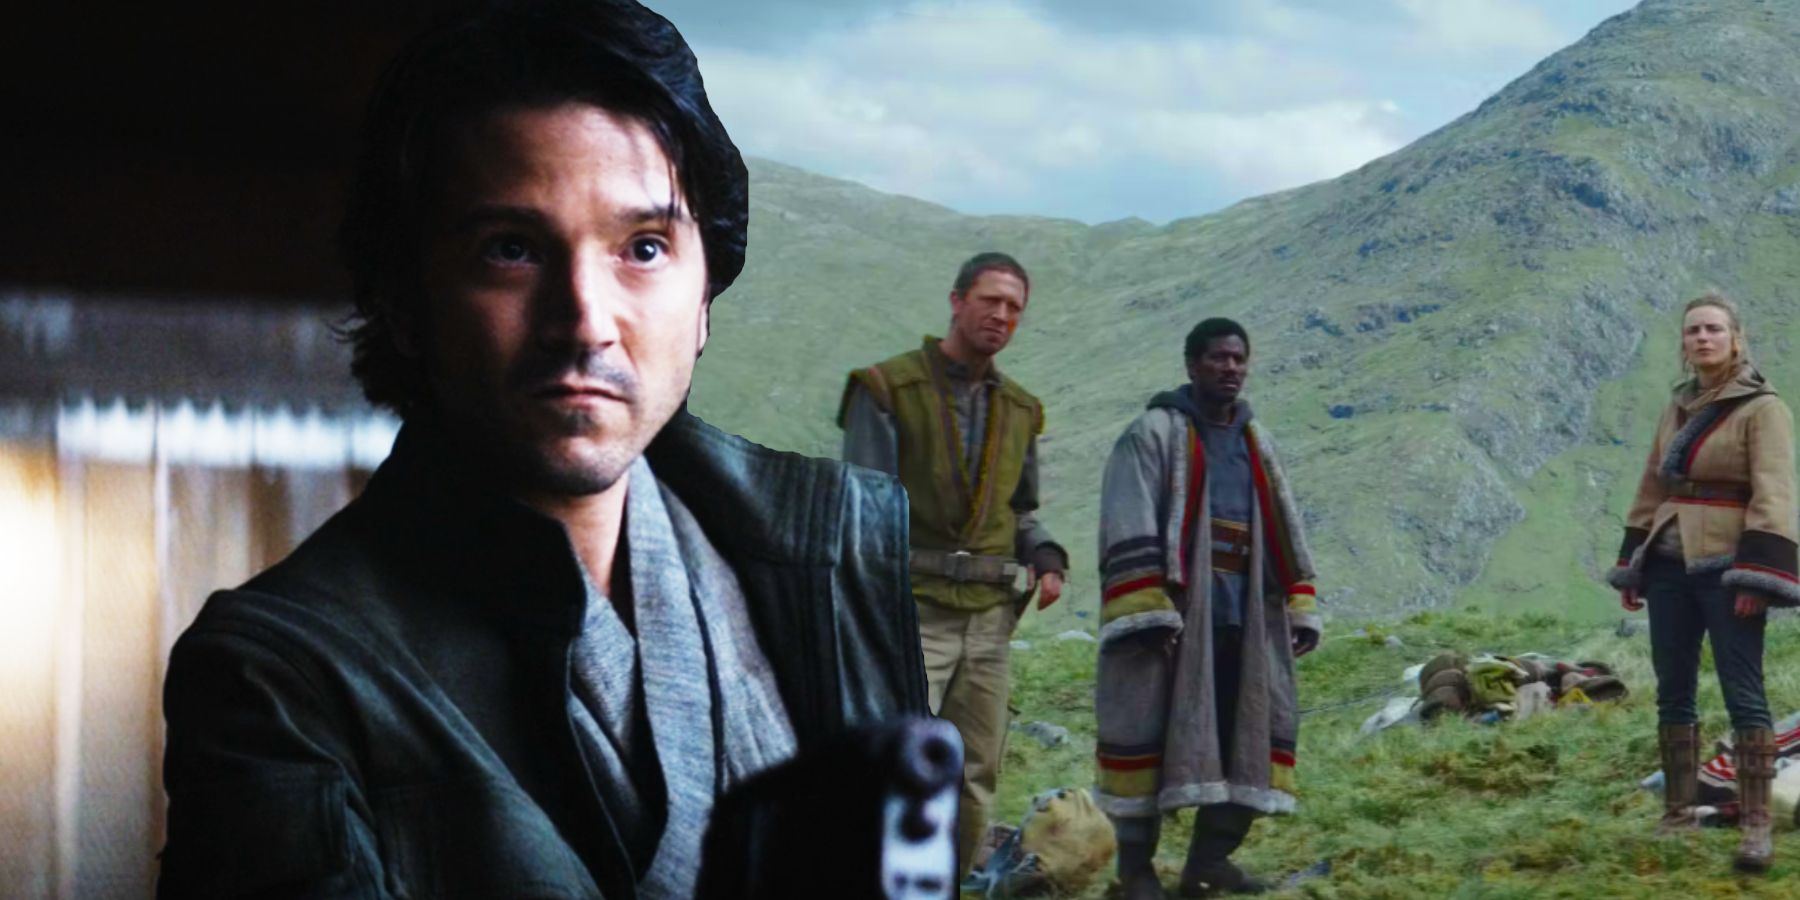 Diego Luna as Cassian Andor and the Aldhani Rebels